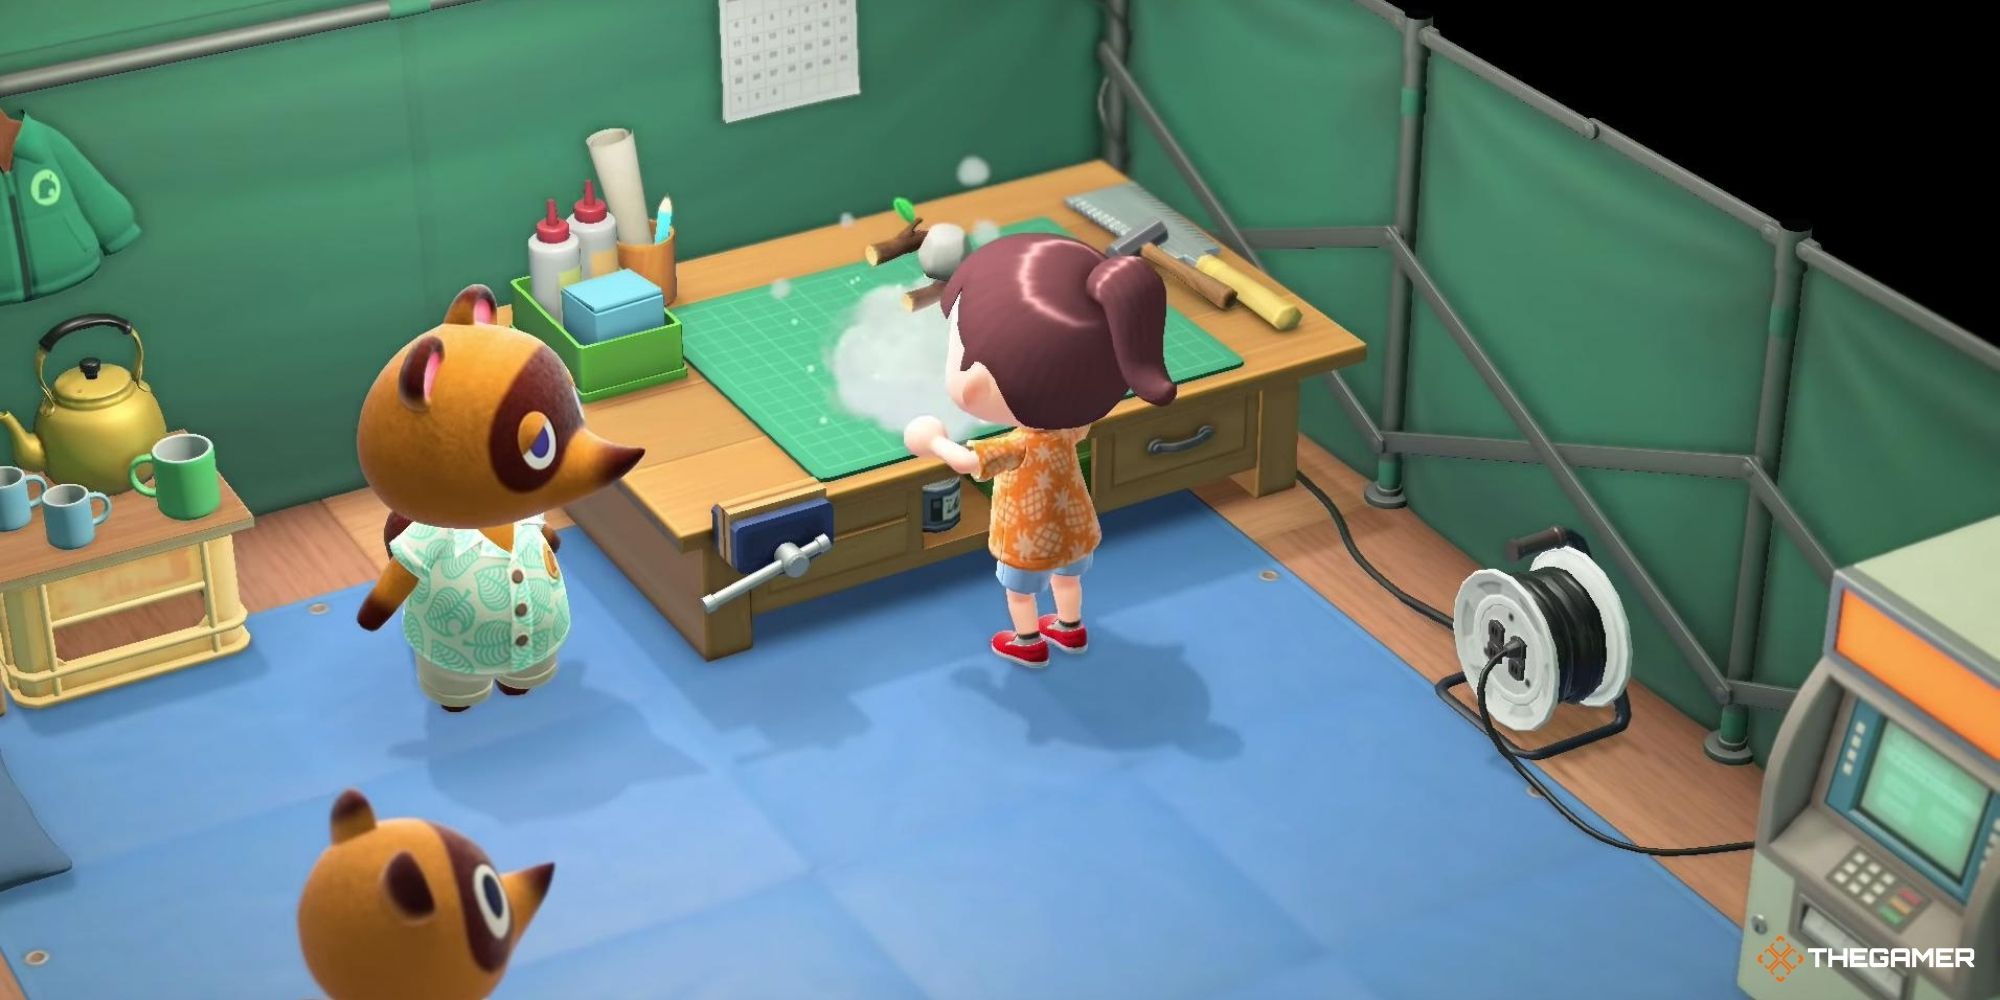 animal crossing new horizons - player completing the diy workshop